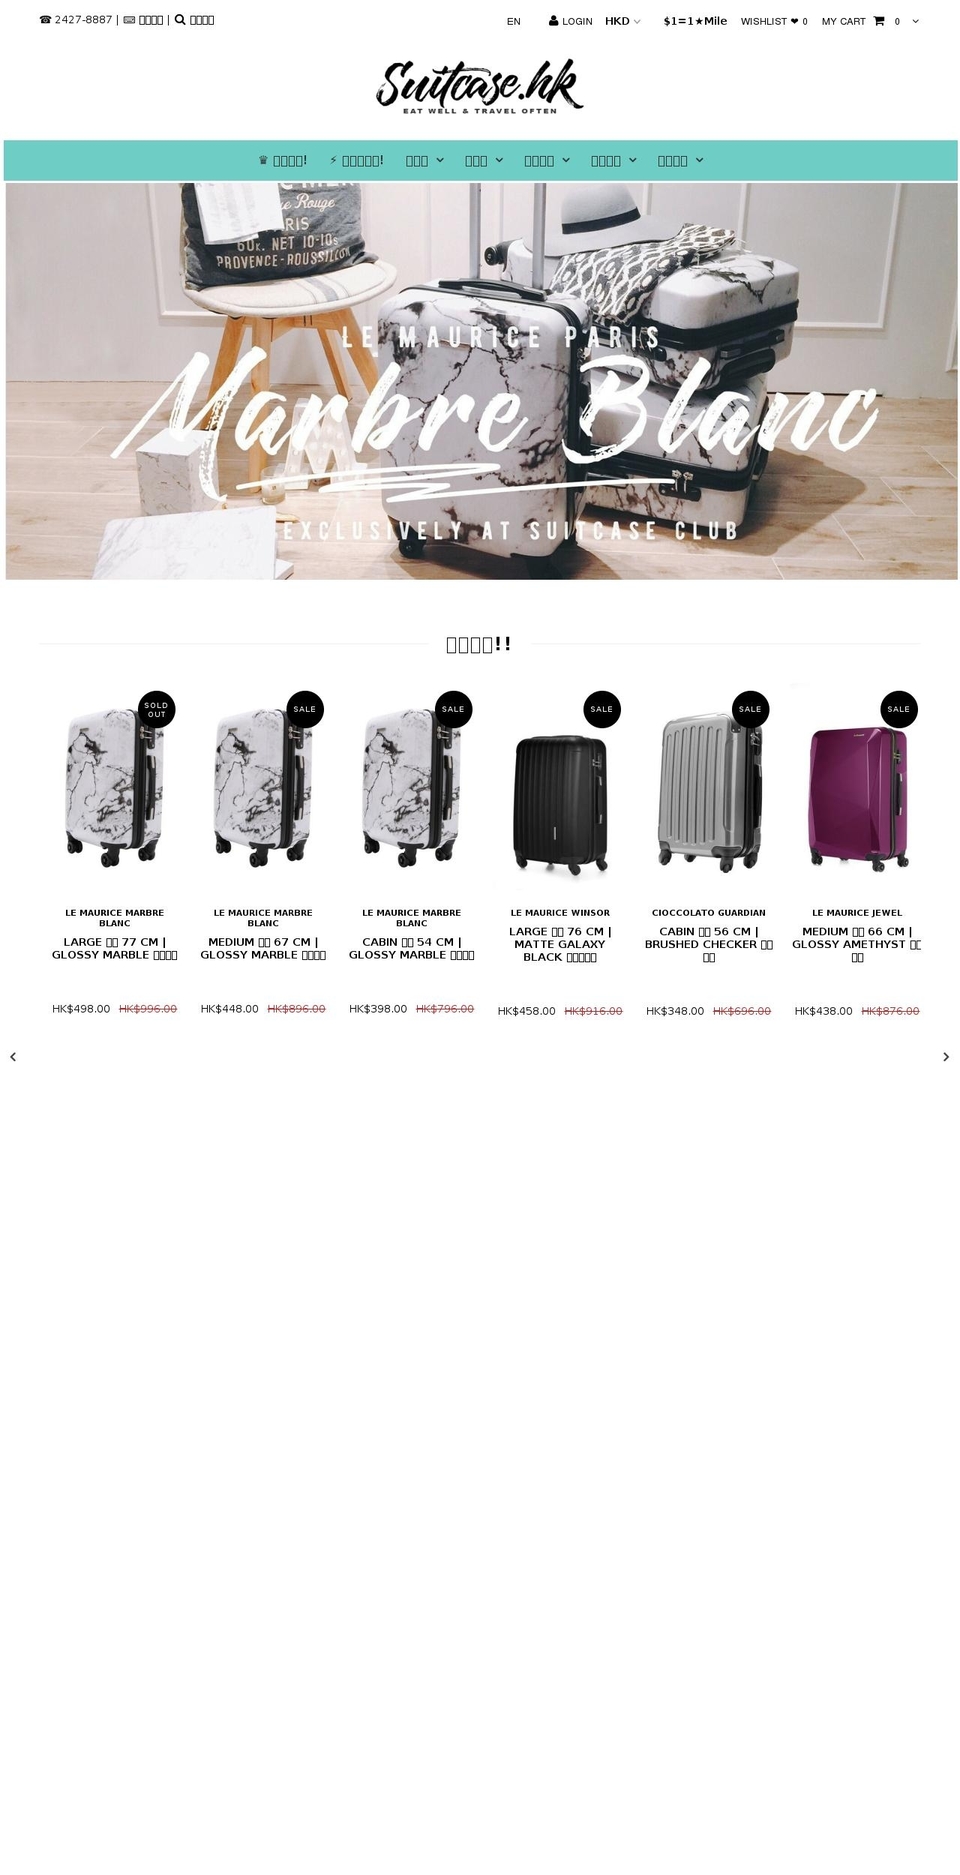 Suitcase Club V Shopify theme site example suitcase.hk